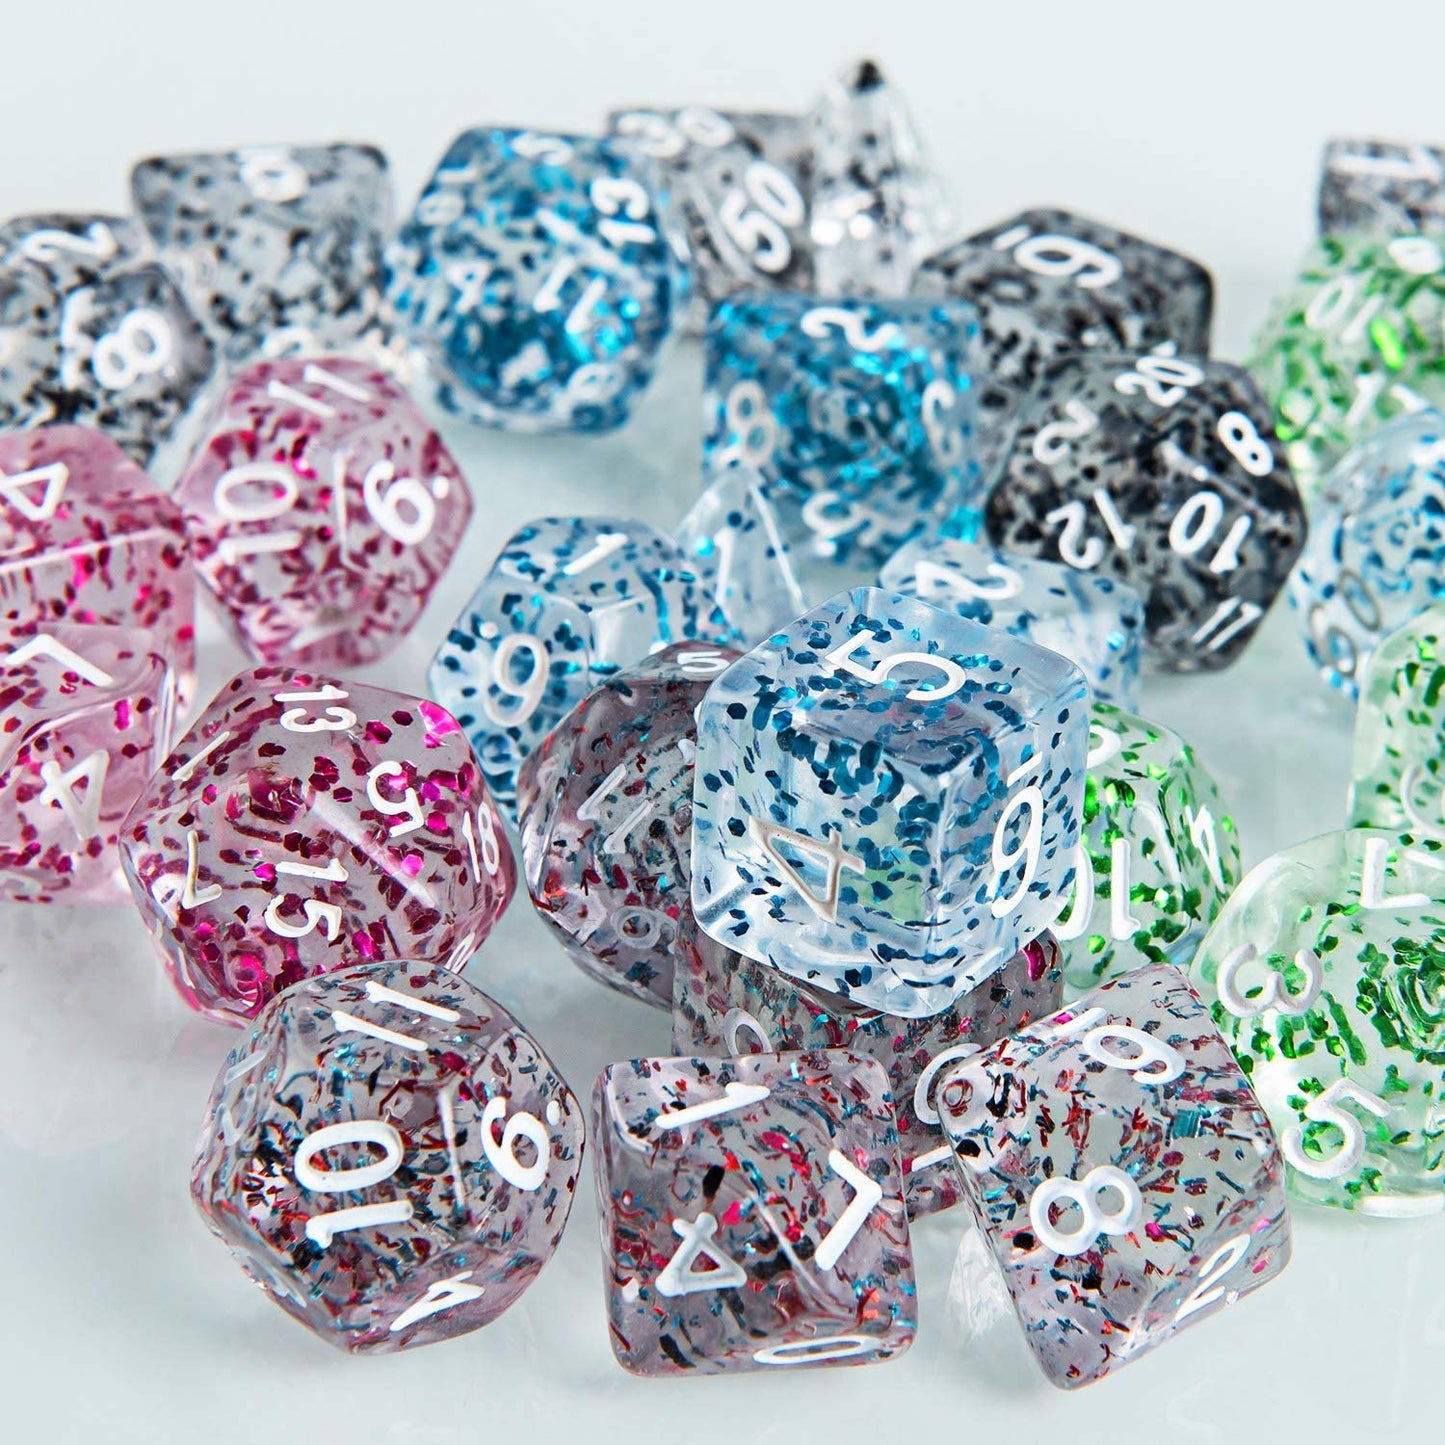 FREE Today: Candy Paper Dice Set